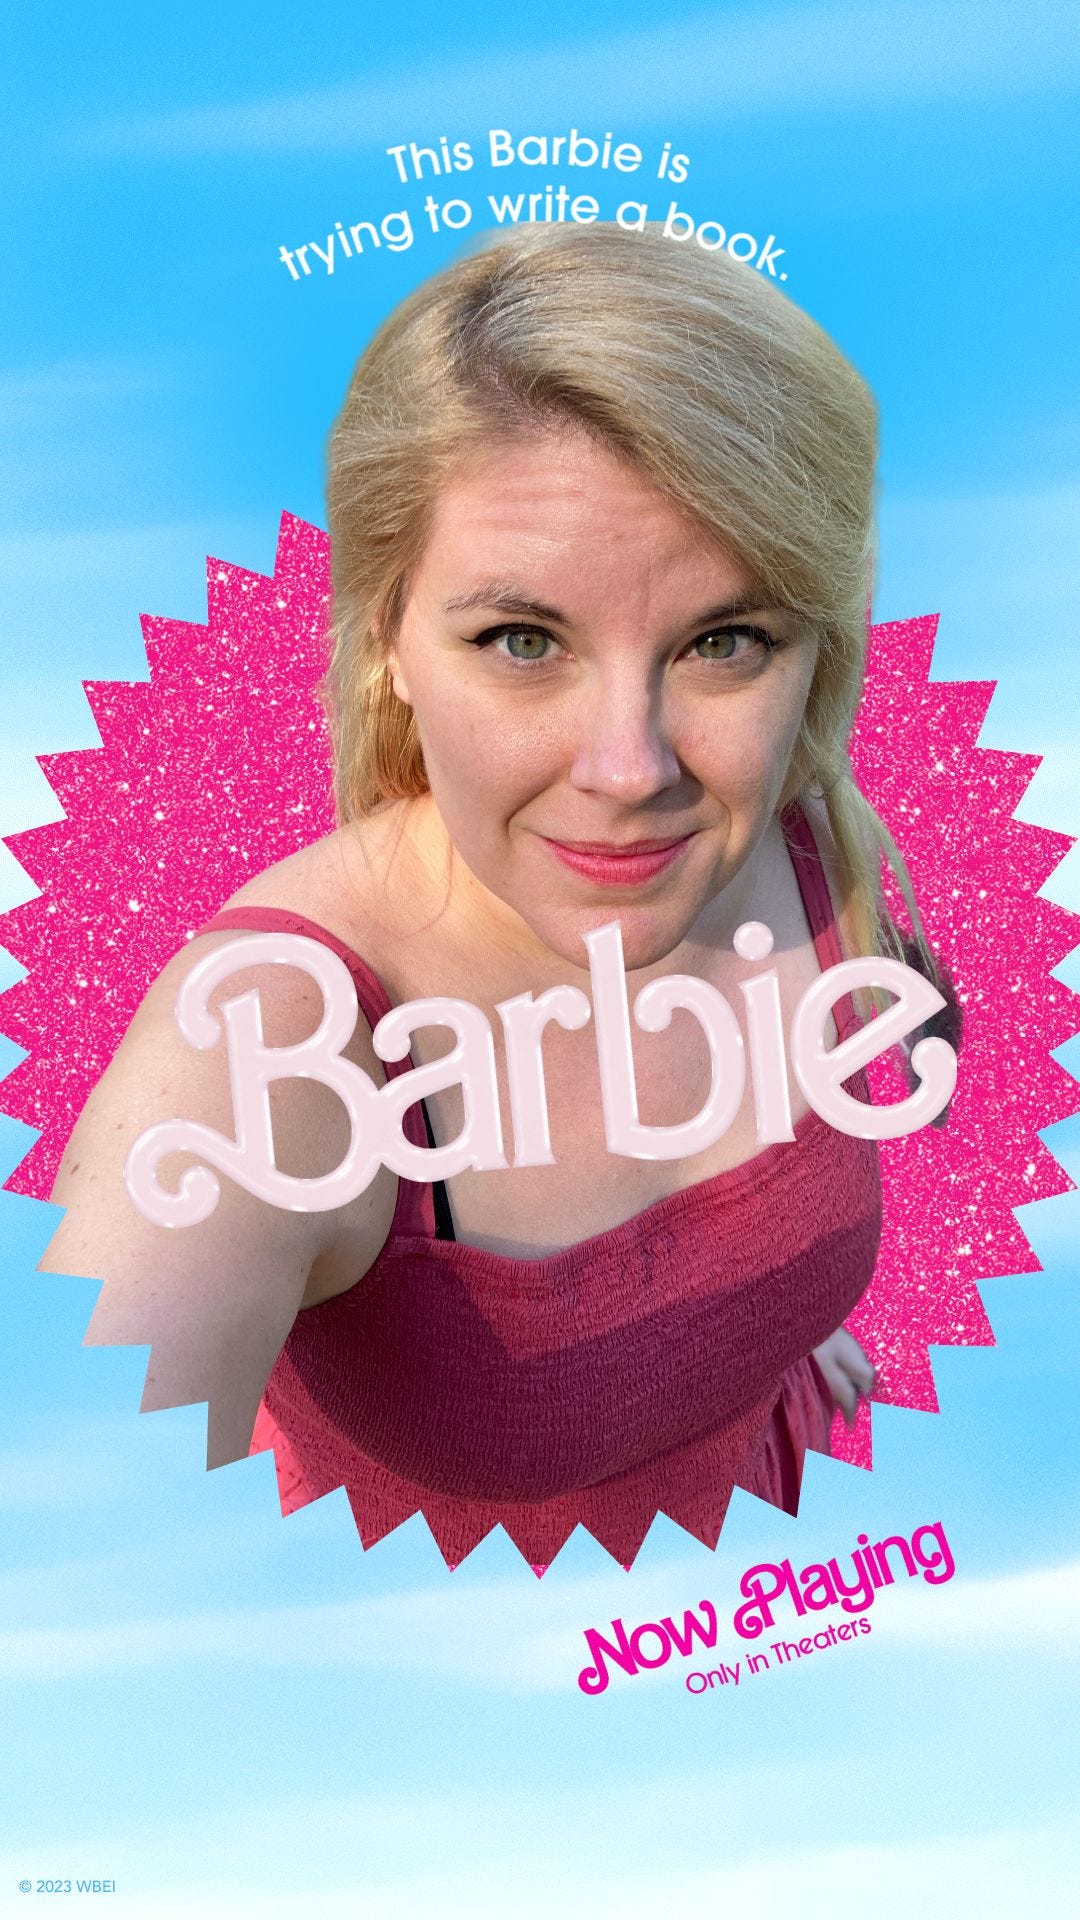 A meme Barbie poster featuring the author, a blonde woman in a pinkish dress, captioned This Barbie is trying to write a book